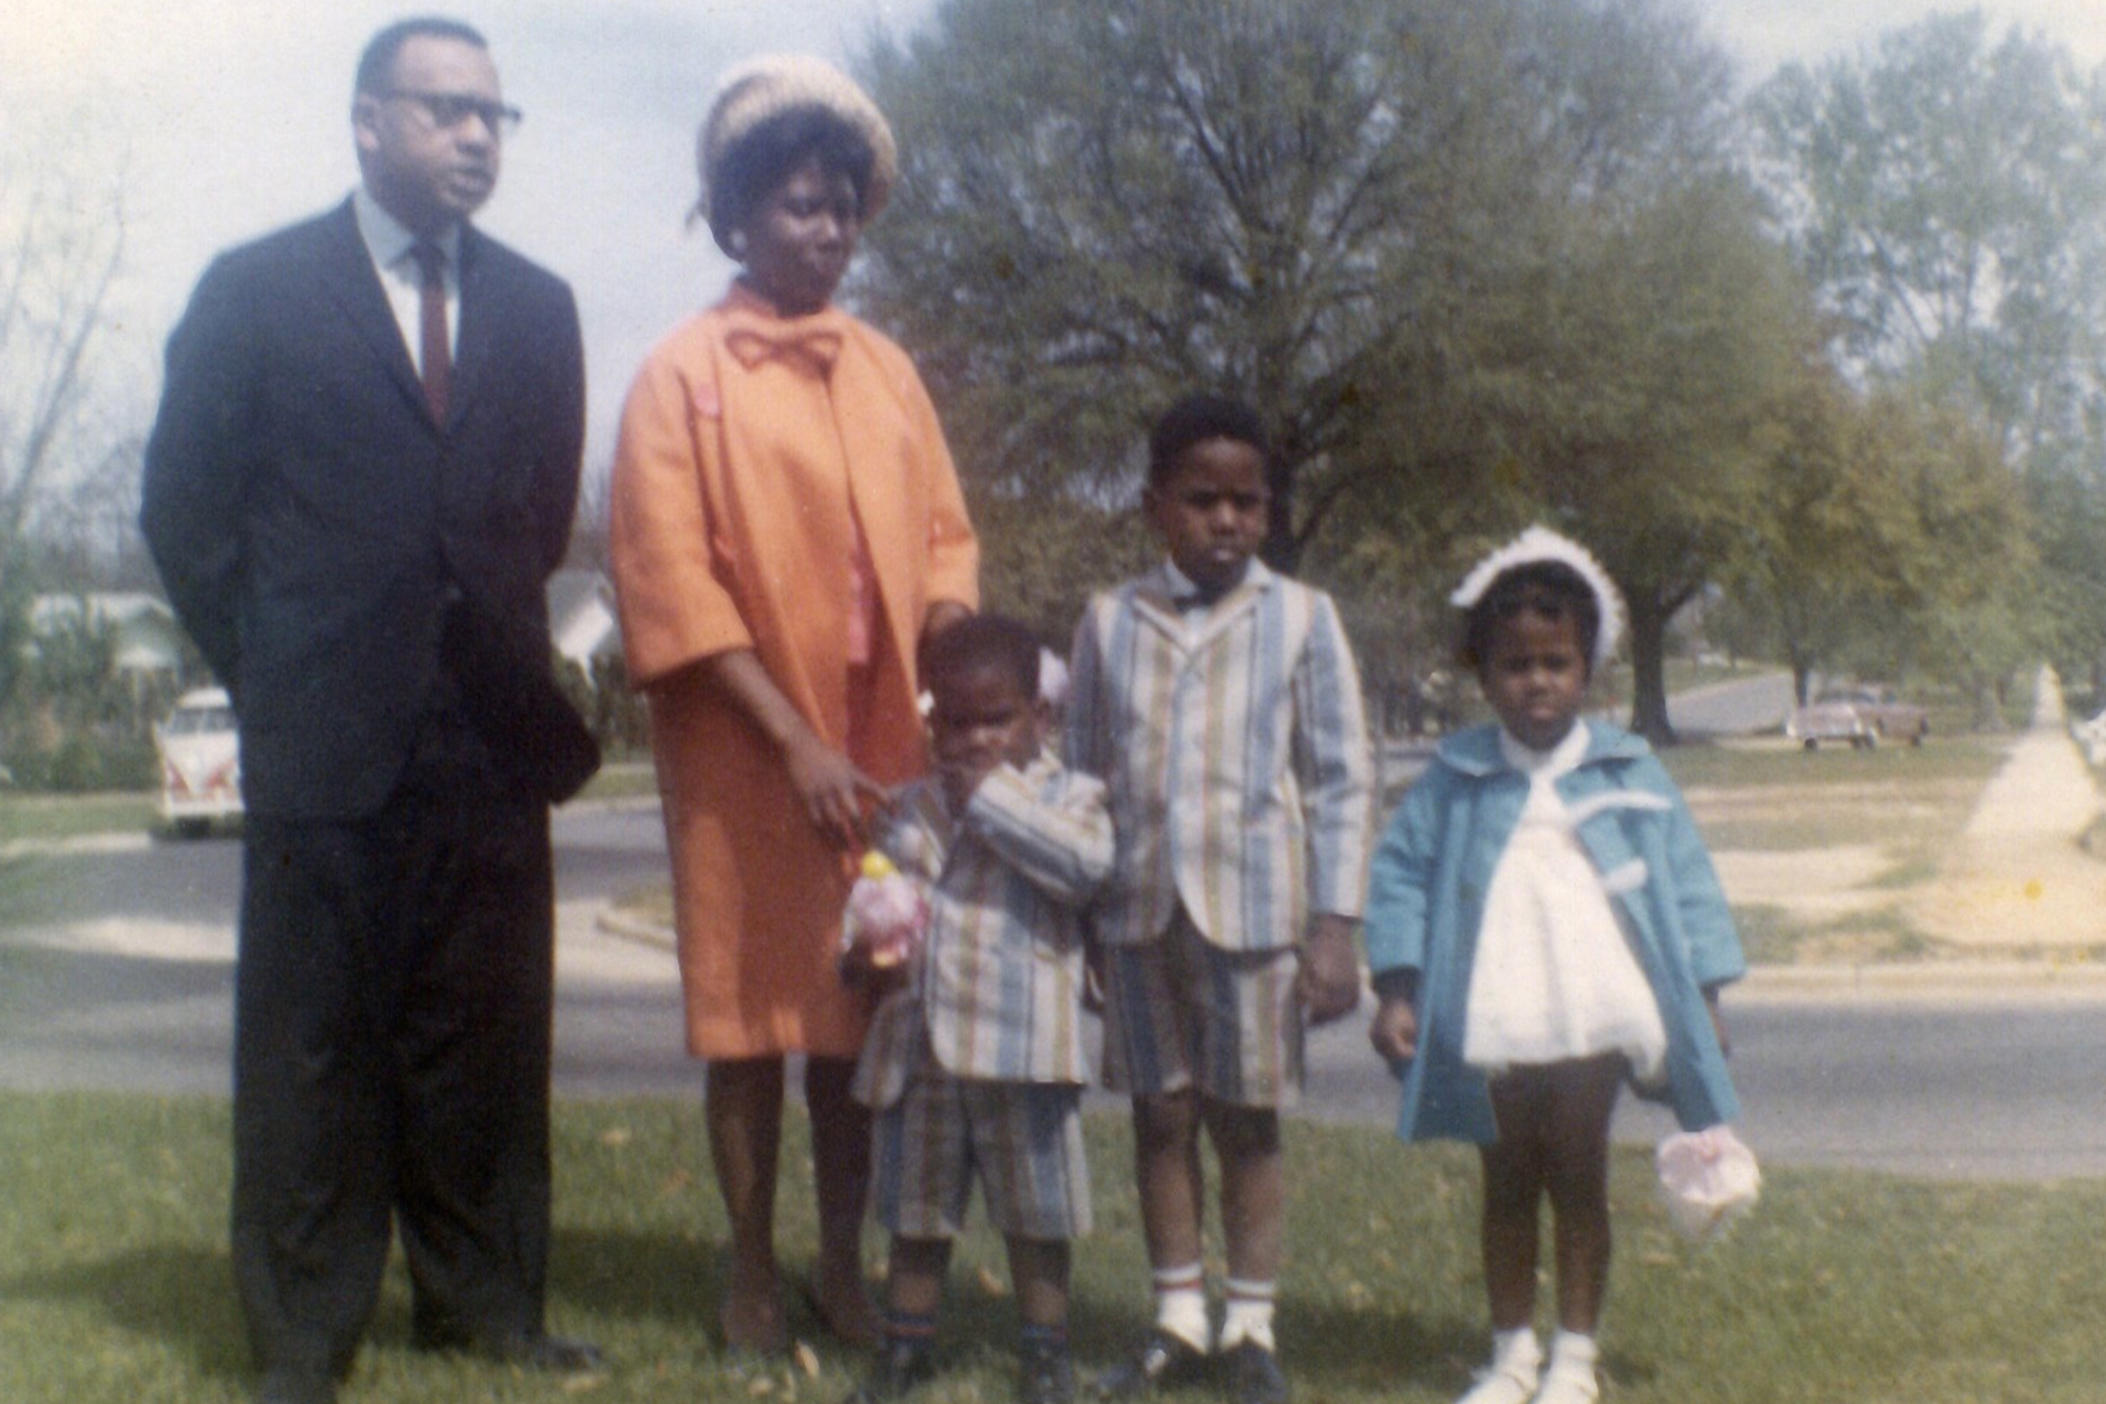 Mrs. King stands with her husband, Slater King and their three children who witnessed the police assault. 